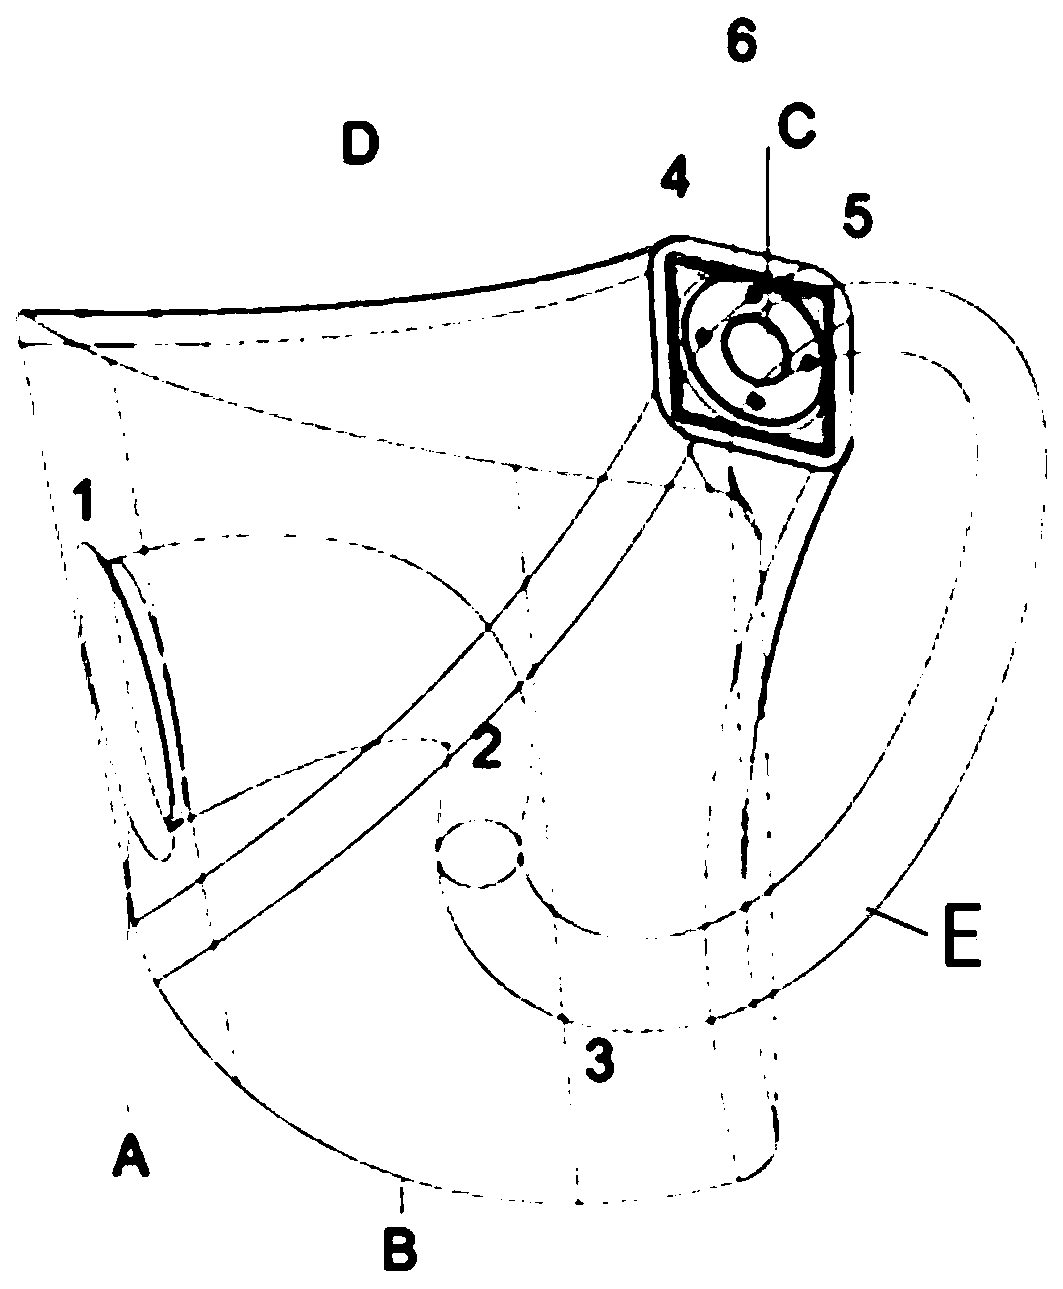 Topological horn type novel horn and sound system